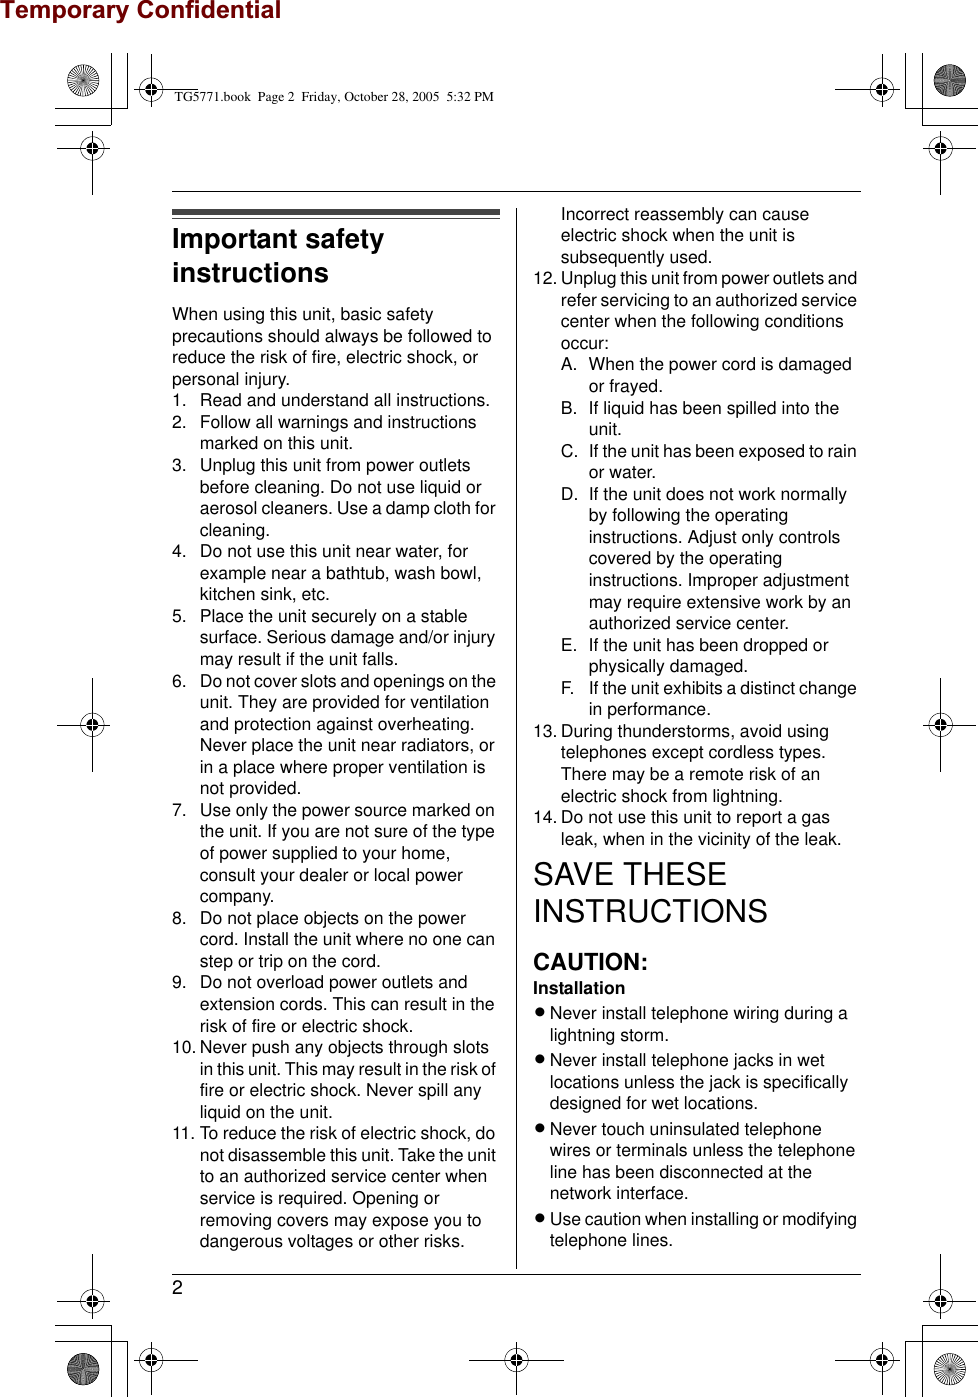 Temporary Confidential2Important safety instructionsWhen using this unit, basic safety precautions should always be followed to reduce the risk of fire, electric shock, or personal injury.1. Read and understand all instructions.2. Follow all warnings and instructions marked on this unit.3. Unplug this unit from power outlets before cleaning. Do not use liquid or aerosol cleaners. Use a damp cloth for cleaning.4. Do not use this unit near water, for example near a bathtub, wash bowl, kitchen sink, etc.5. Place the unit securely on a stable surface. Serious damage and/or injury may result if the unit falls.6. Do not cover slots and openings on the unit. They are provided for ventilation and protection against overheating. Never place the unit near radiators, or in a place where proper ventilation is not provided.7. Use only the power source marked on the unit. If you are not sure of the type of power supplied to your home, consult your dealer or local power company.8. Do not place objects on the power cord. Install the unit where no one can step or trip on the cord.9. Do not overload power outlets and extension cords. This can result in the risk of fire or electric shock.10. Never push any objects through slots in this unit. This may result in the risk of fire or electric shock. Never spill any liquid on the unit.11. To reduce the risk of electric shock, do not disassemble this unit. Take the unit to an authorized service center when service is required. Opening or removing covers may expose you to dangerous voltages or other risks. Incorrect reassembly can cause electric shock when the unit is subsequently used.12. Unplug this unit from power outlets and refer servicing to an authorized service center when the following conditions occur:A. When the power cord is damaged or frayed.B. If liquid has been spilled into the unit.C. If the unit has been exposed to rain or water.D. If the unit does not work normally by following the operating instructions. Adjust only controls covered by the operating instructions. Improper adjustment may require extensive work by an authorized service center.E. If the unit has been dropped or physically damaged.F. If the unit exhibits a distinct change in performance.13. During thunderstorms, avoid using telephones except cordless types. There may be a remote risk of an electric shock from lightning.14. Do not use this unit to report a gas leak, when in the vicinity of the leak.SAVE THESE INSTRUCTIONSCAUTION:InstallationLNever install telephone wiring during a lightning storm.LNever install telephone jacks in wet locations unless the jack is specifically designed for wet locations.LNever touch uninsulated telephone wires or terminals unless the telephone line has been disconnected at the network interface.LUse caution when installing or modifying telephone lines.TG5771.book  Page 2  Friday, October 28, 2005  5:32 PM